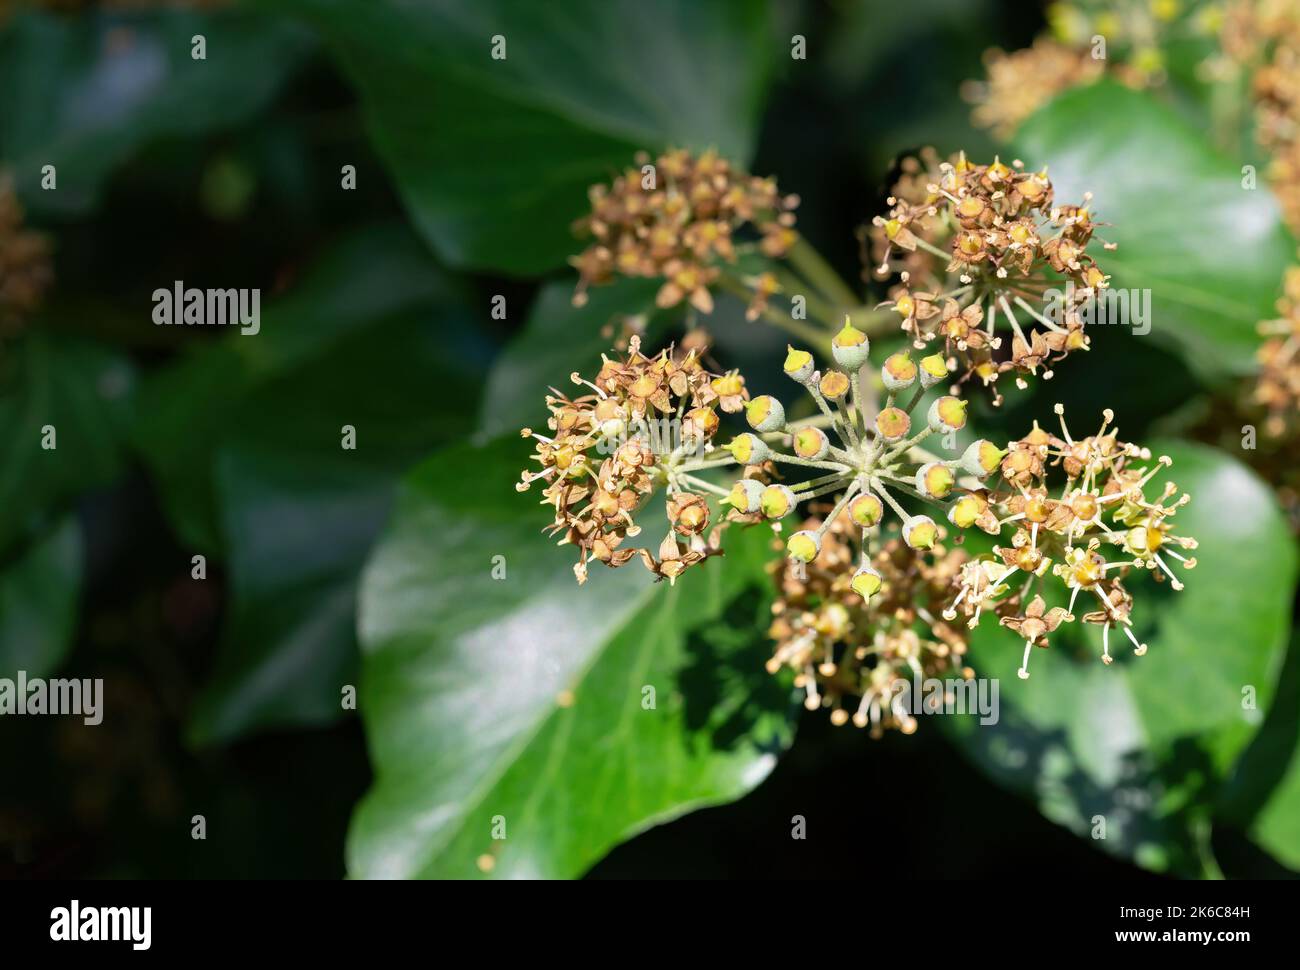 Hedera helix in bloom, growing on a tree trunk, in Marche region, Italy Stock Photo